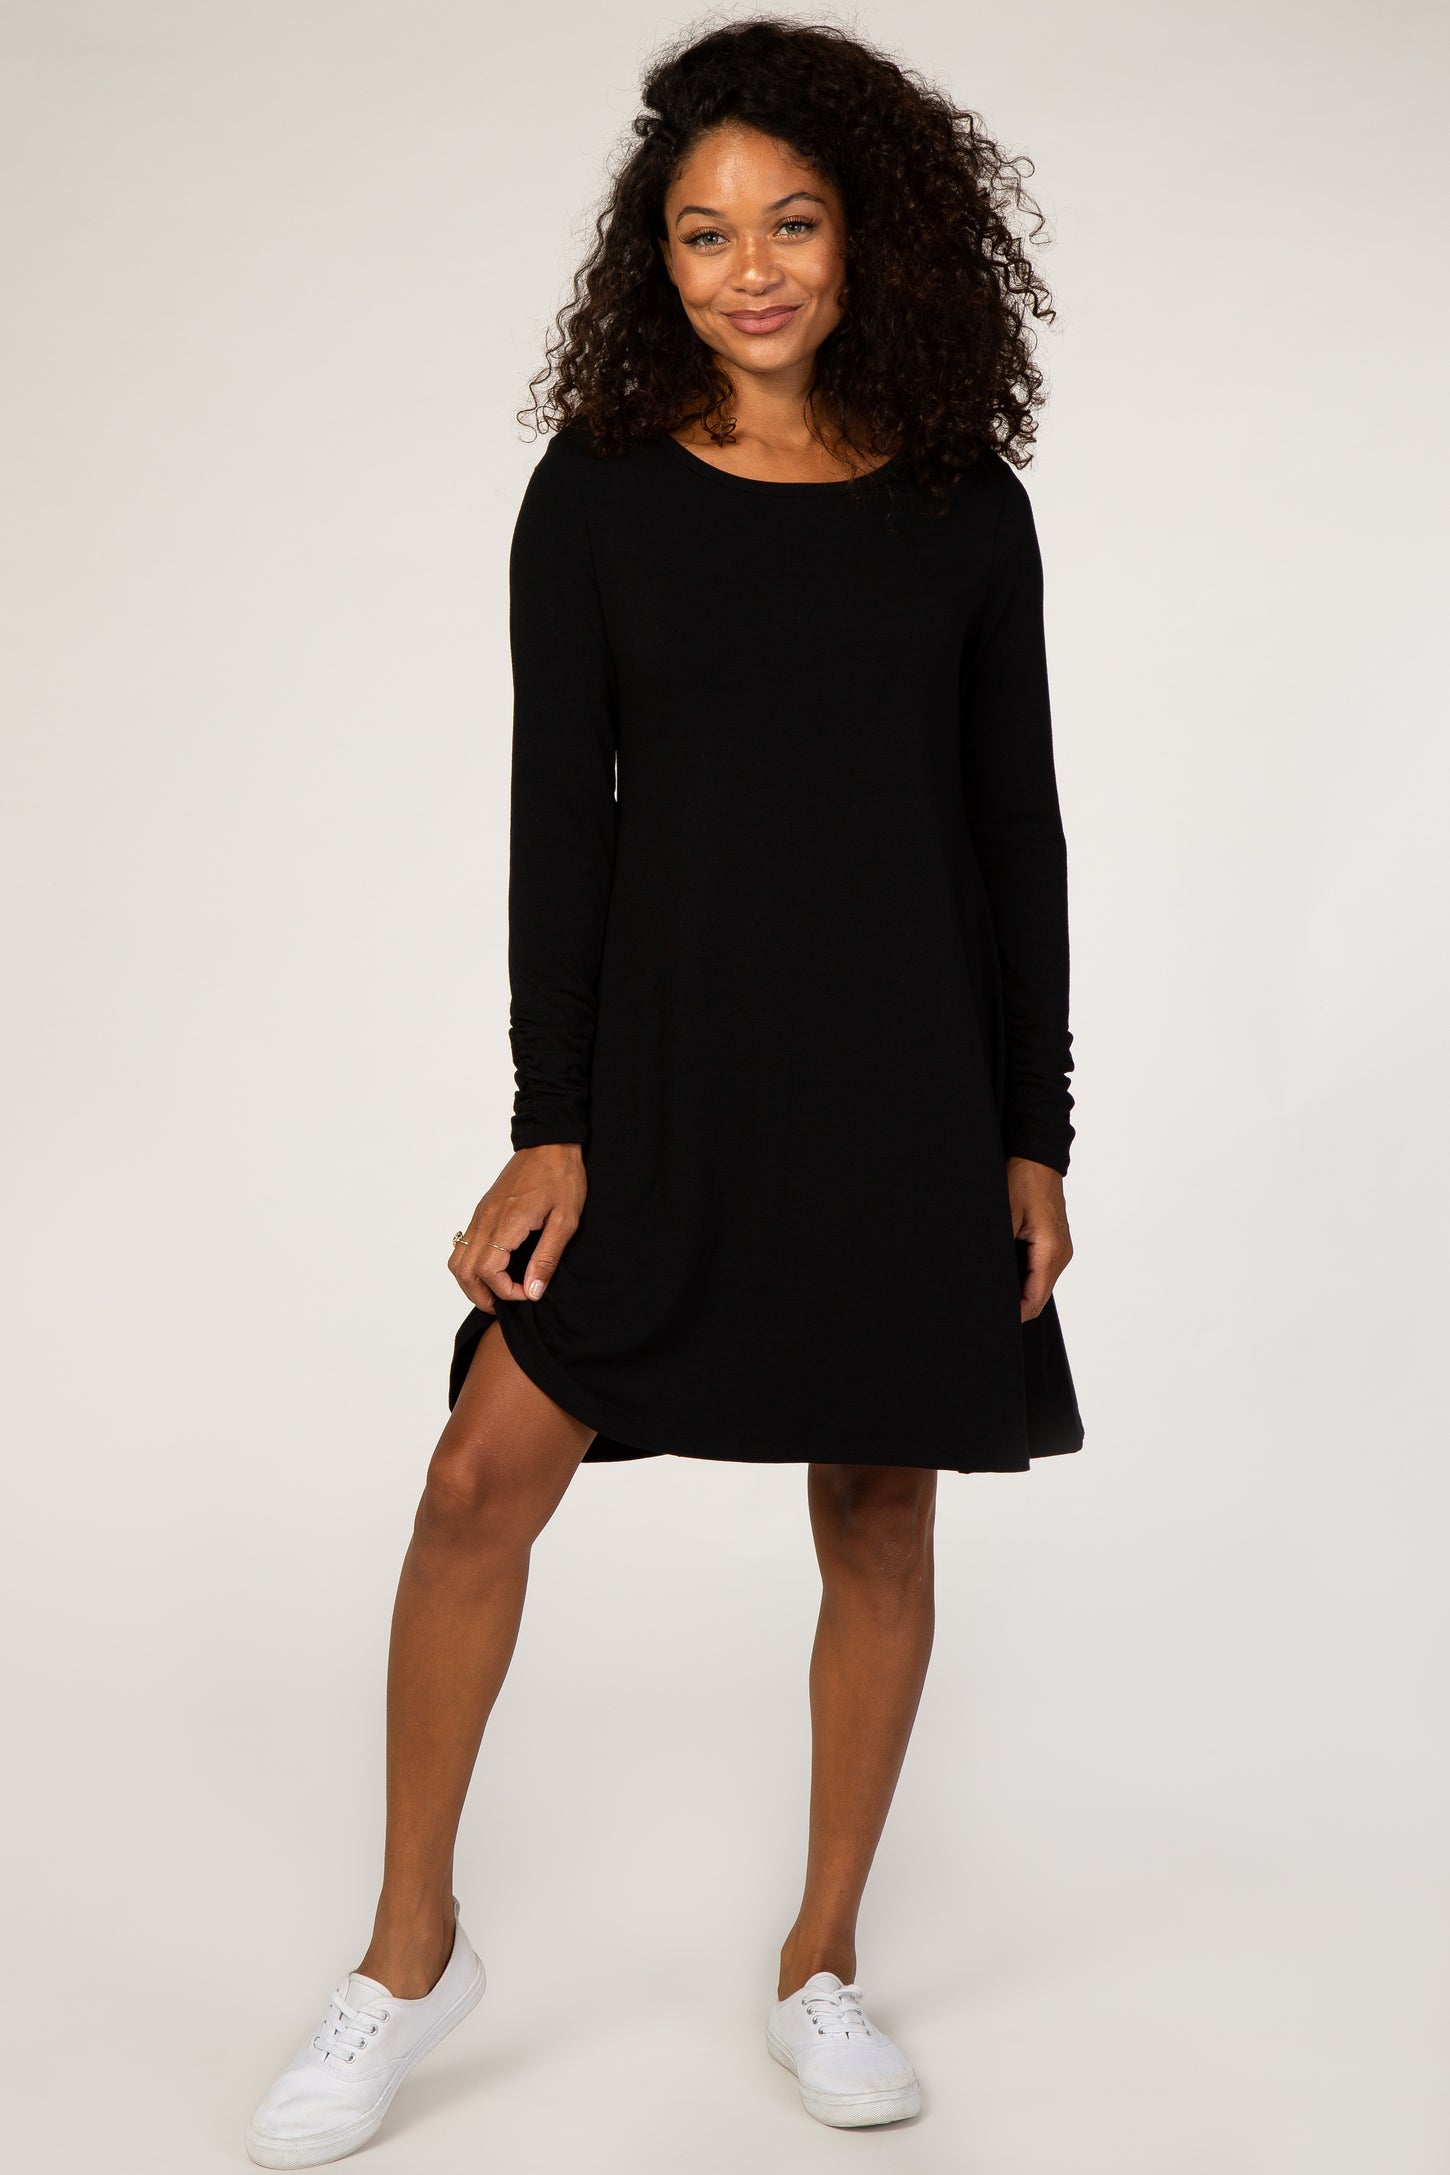 Black Ruched Sleeve Swing Dress